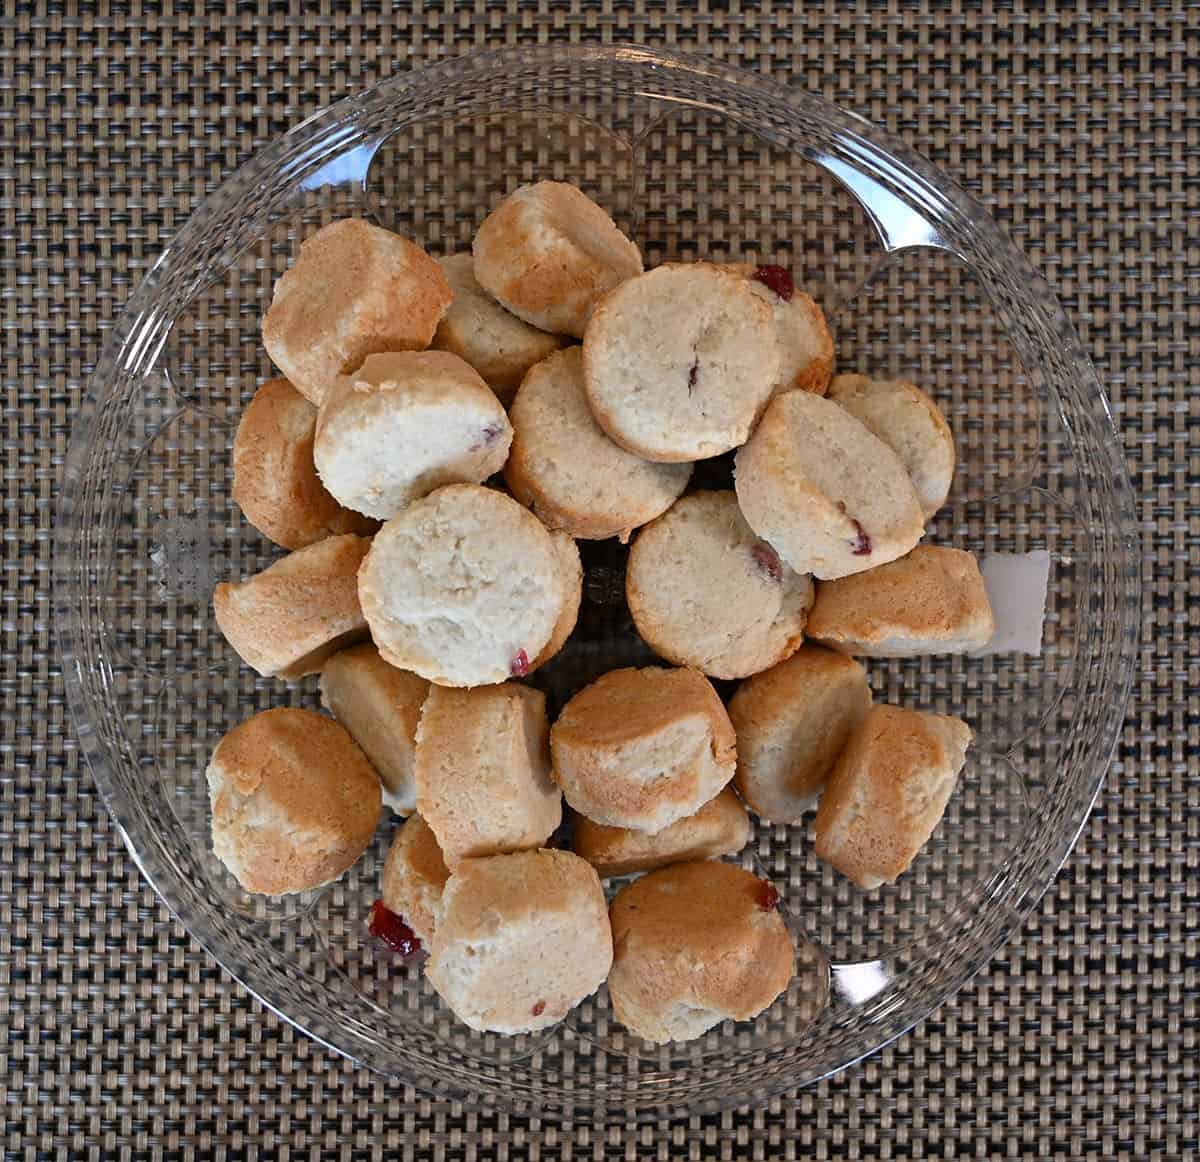 Costco Universal Bakery Coconut Bites container with the lid off showing all the bites, top down image. 